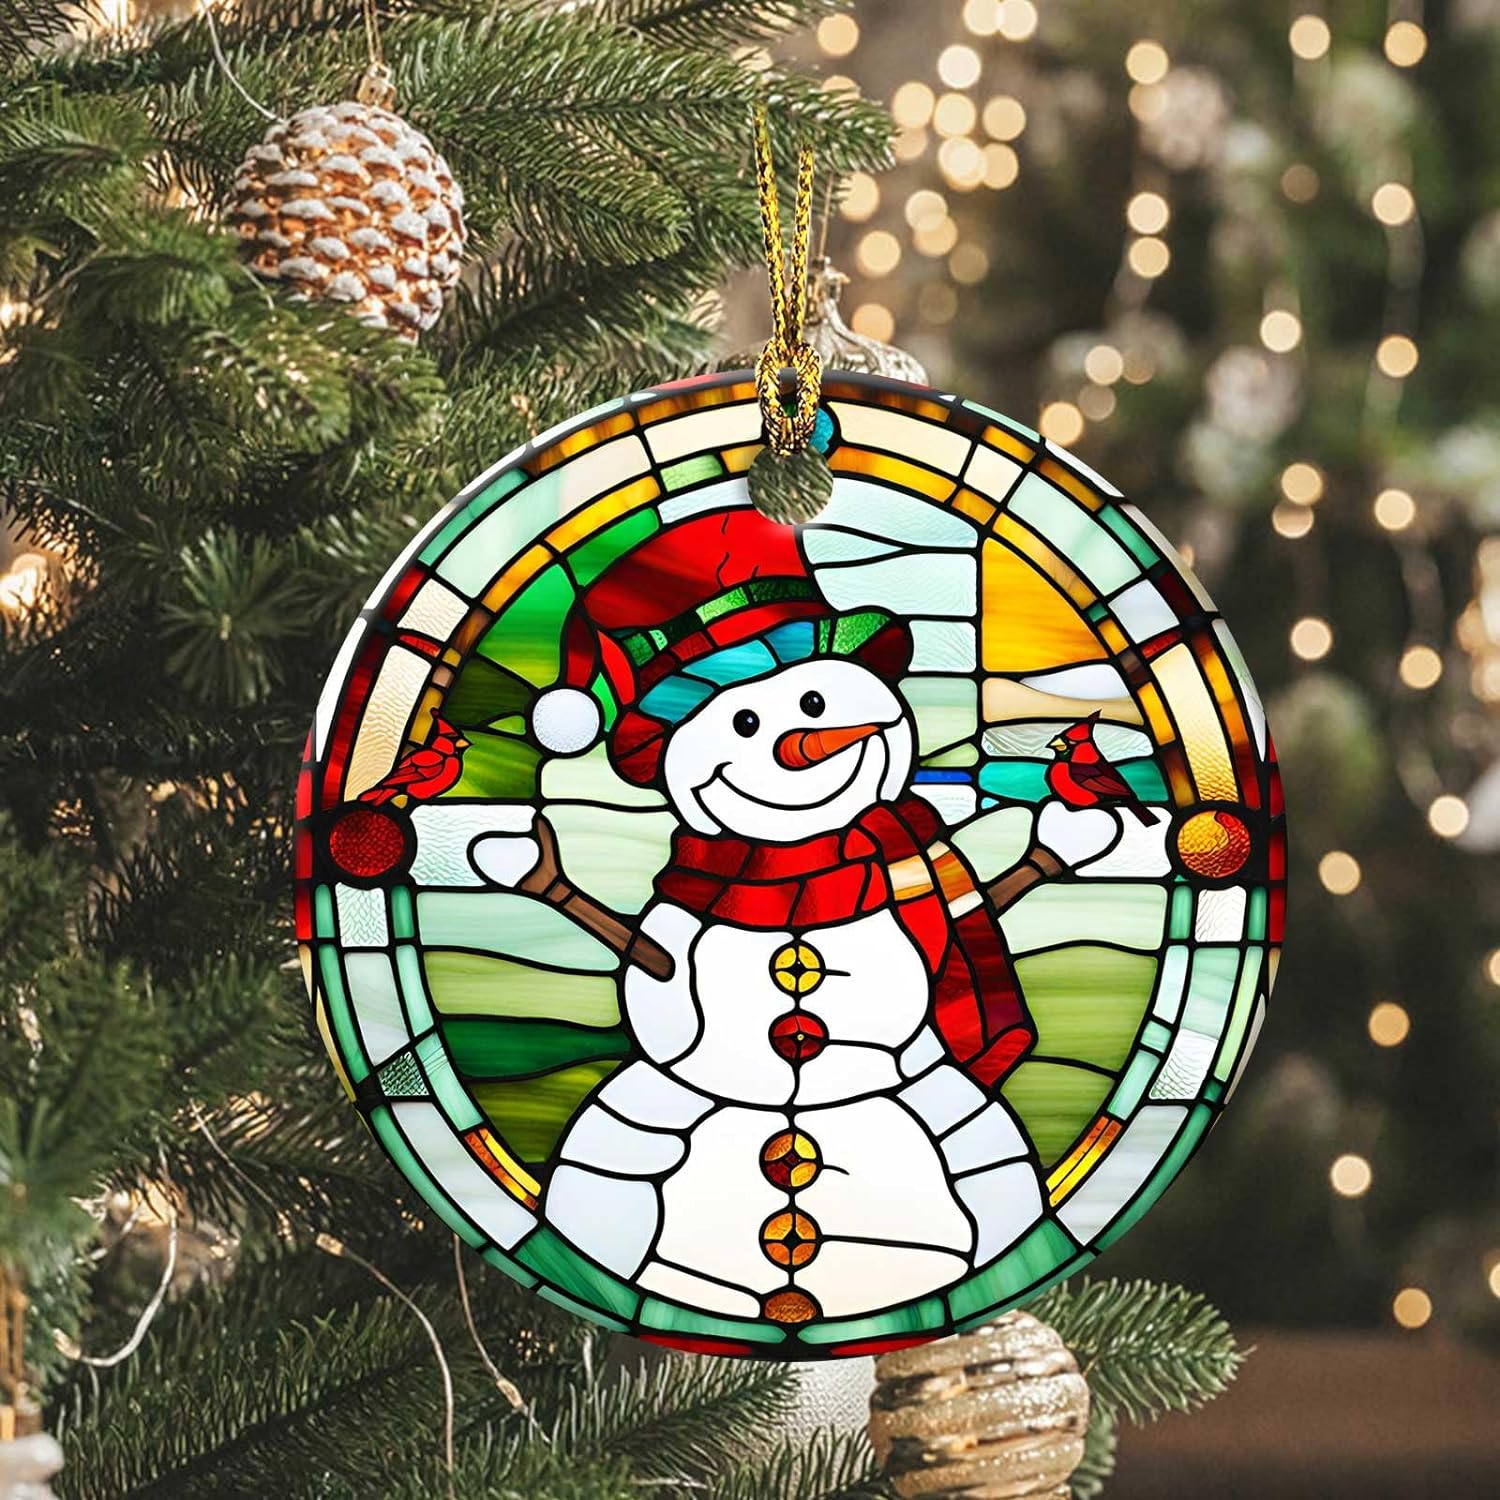 snowman cardinals ornament 2023 round ceramic colorful glass style ornament xmas keepsake best 10 christmas tree with gifts-ultimate guide 2023